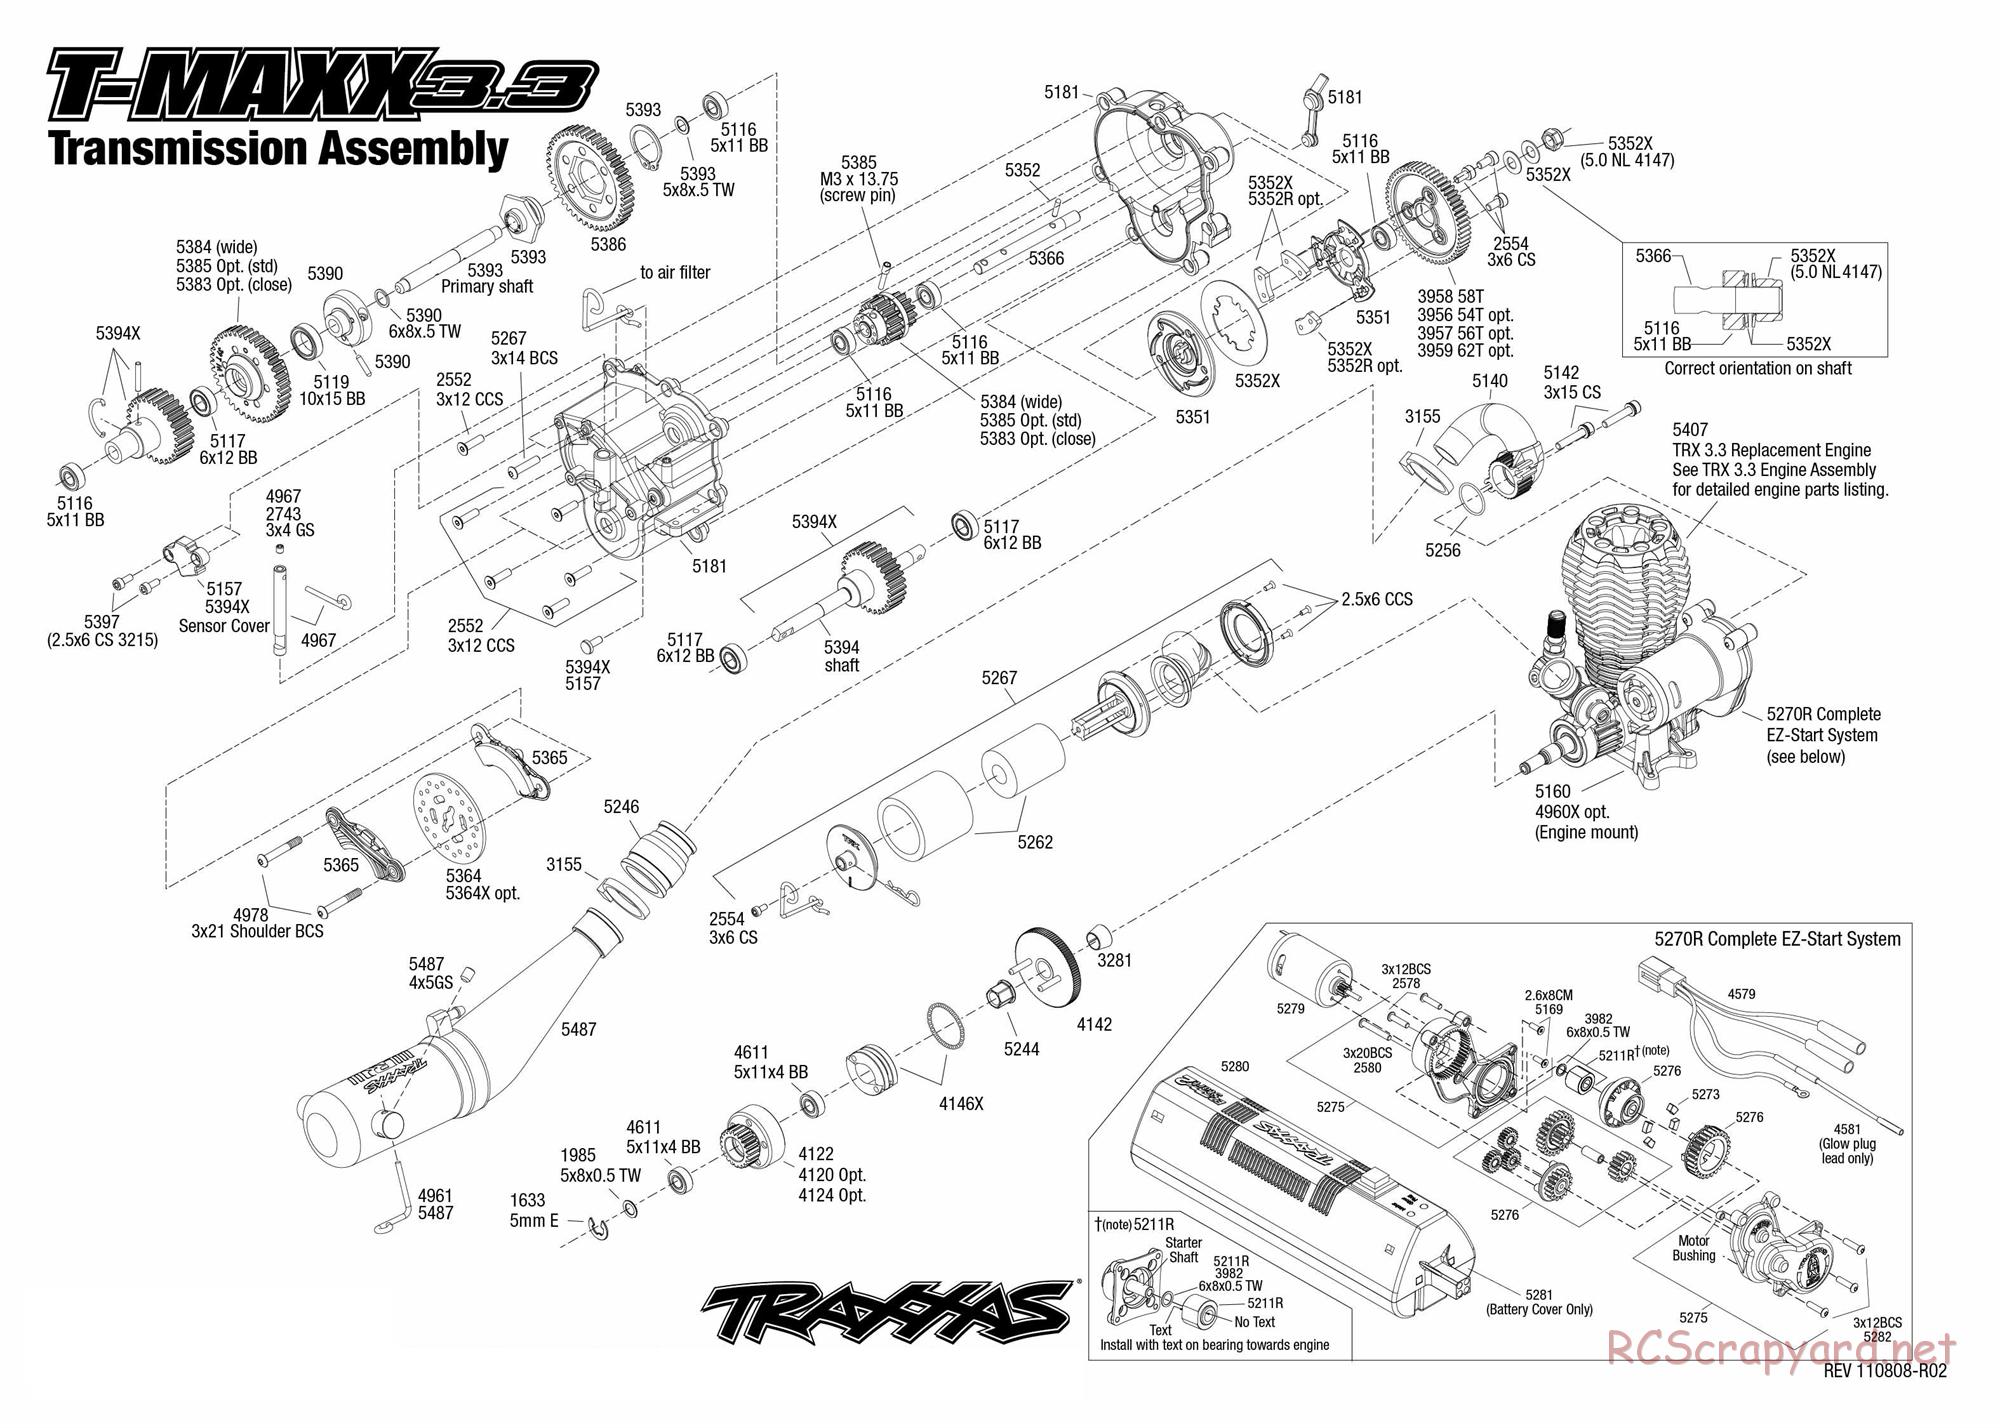 Traxxas - T-Maxx 3.3 (2010) - Exploded Views - Page 5